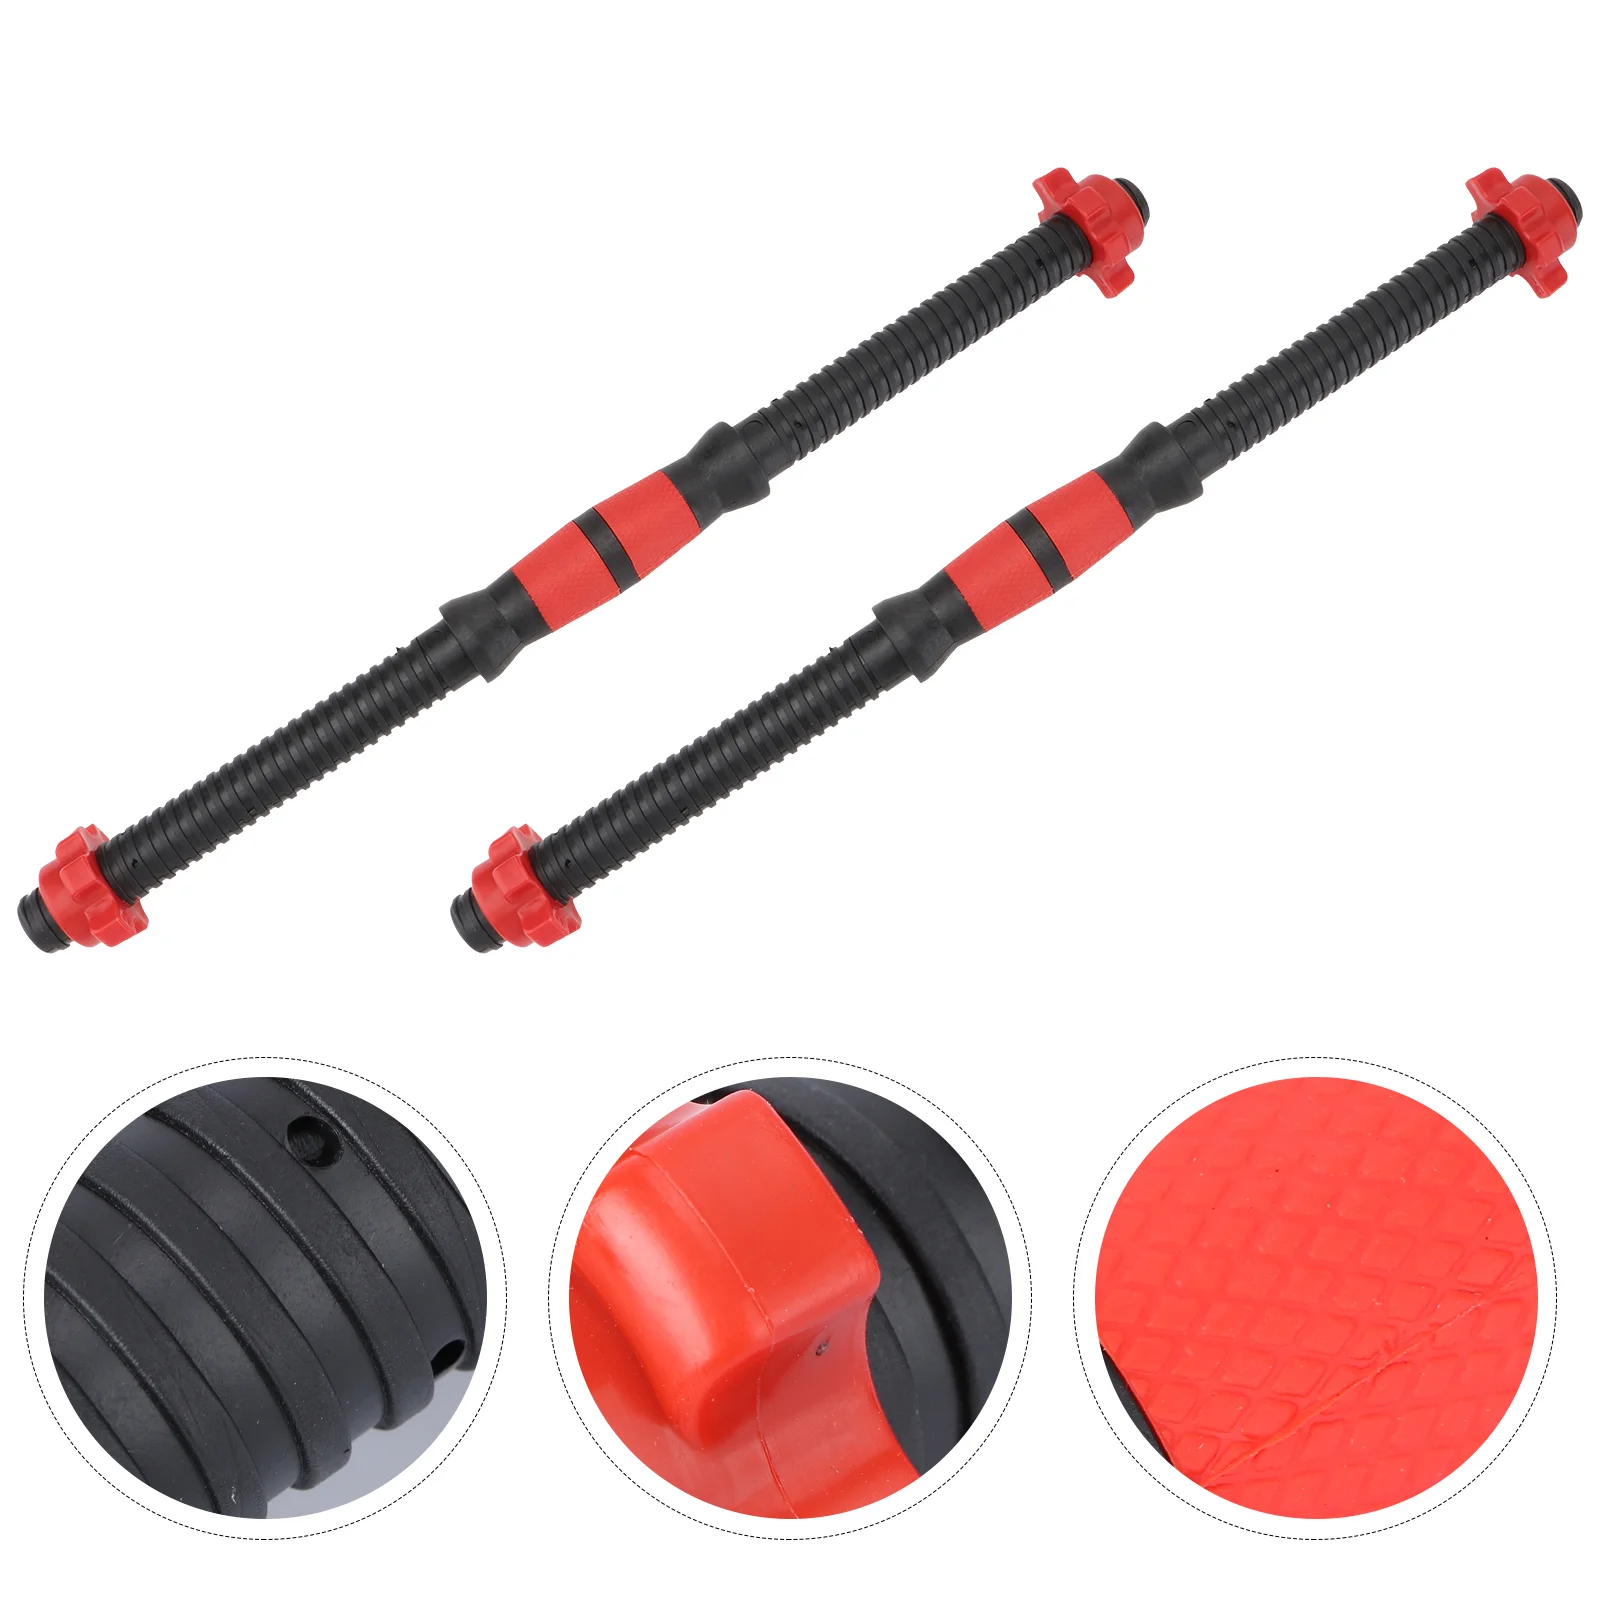 

2pcs 40cm Dumbbell Bars Dumbbell Handles Weight Lifting Spinlock Collar Set with 4pcs Nuts for Gym Barbells Dumbbell Bars